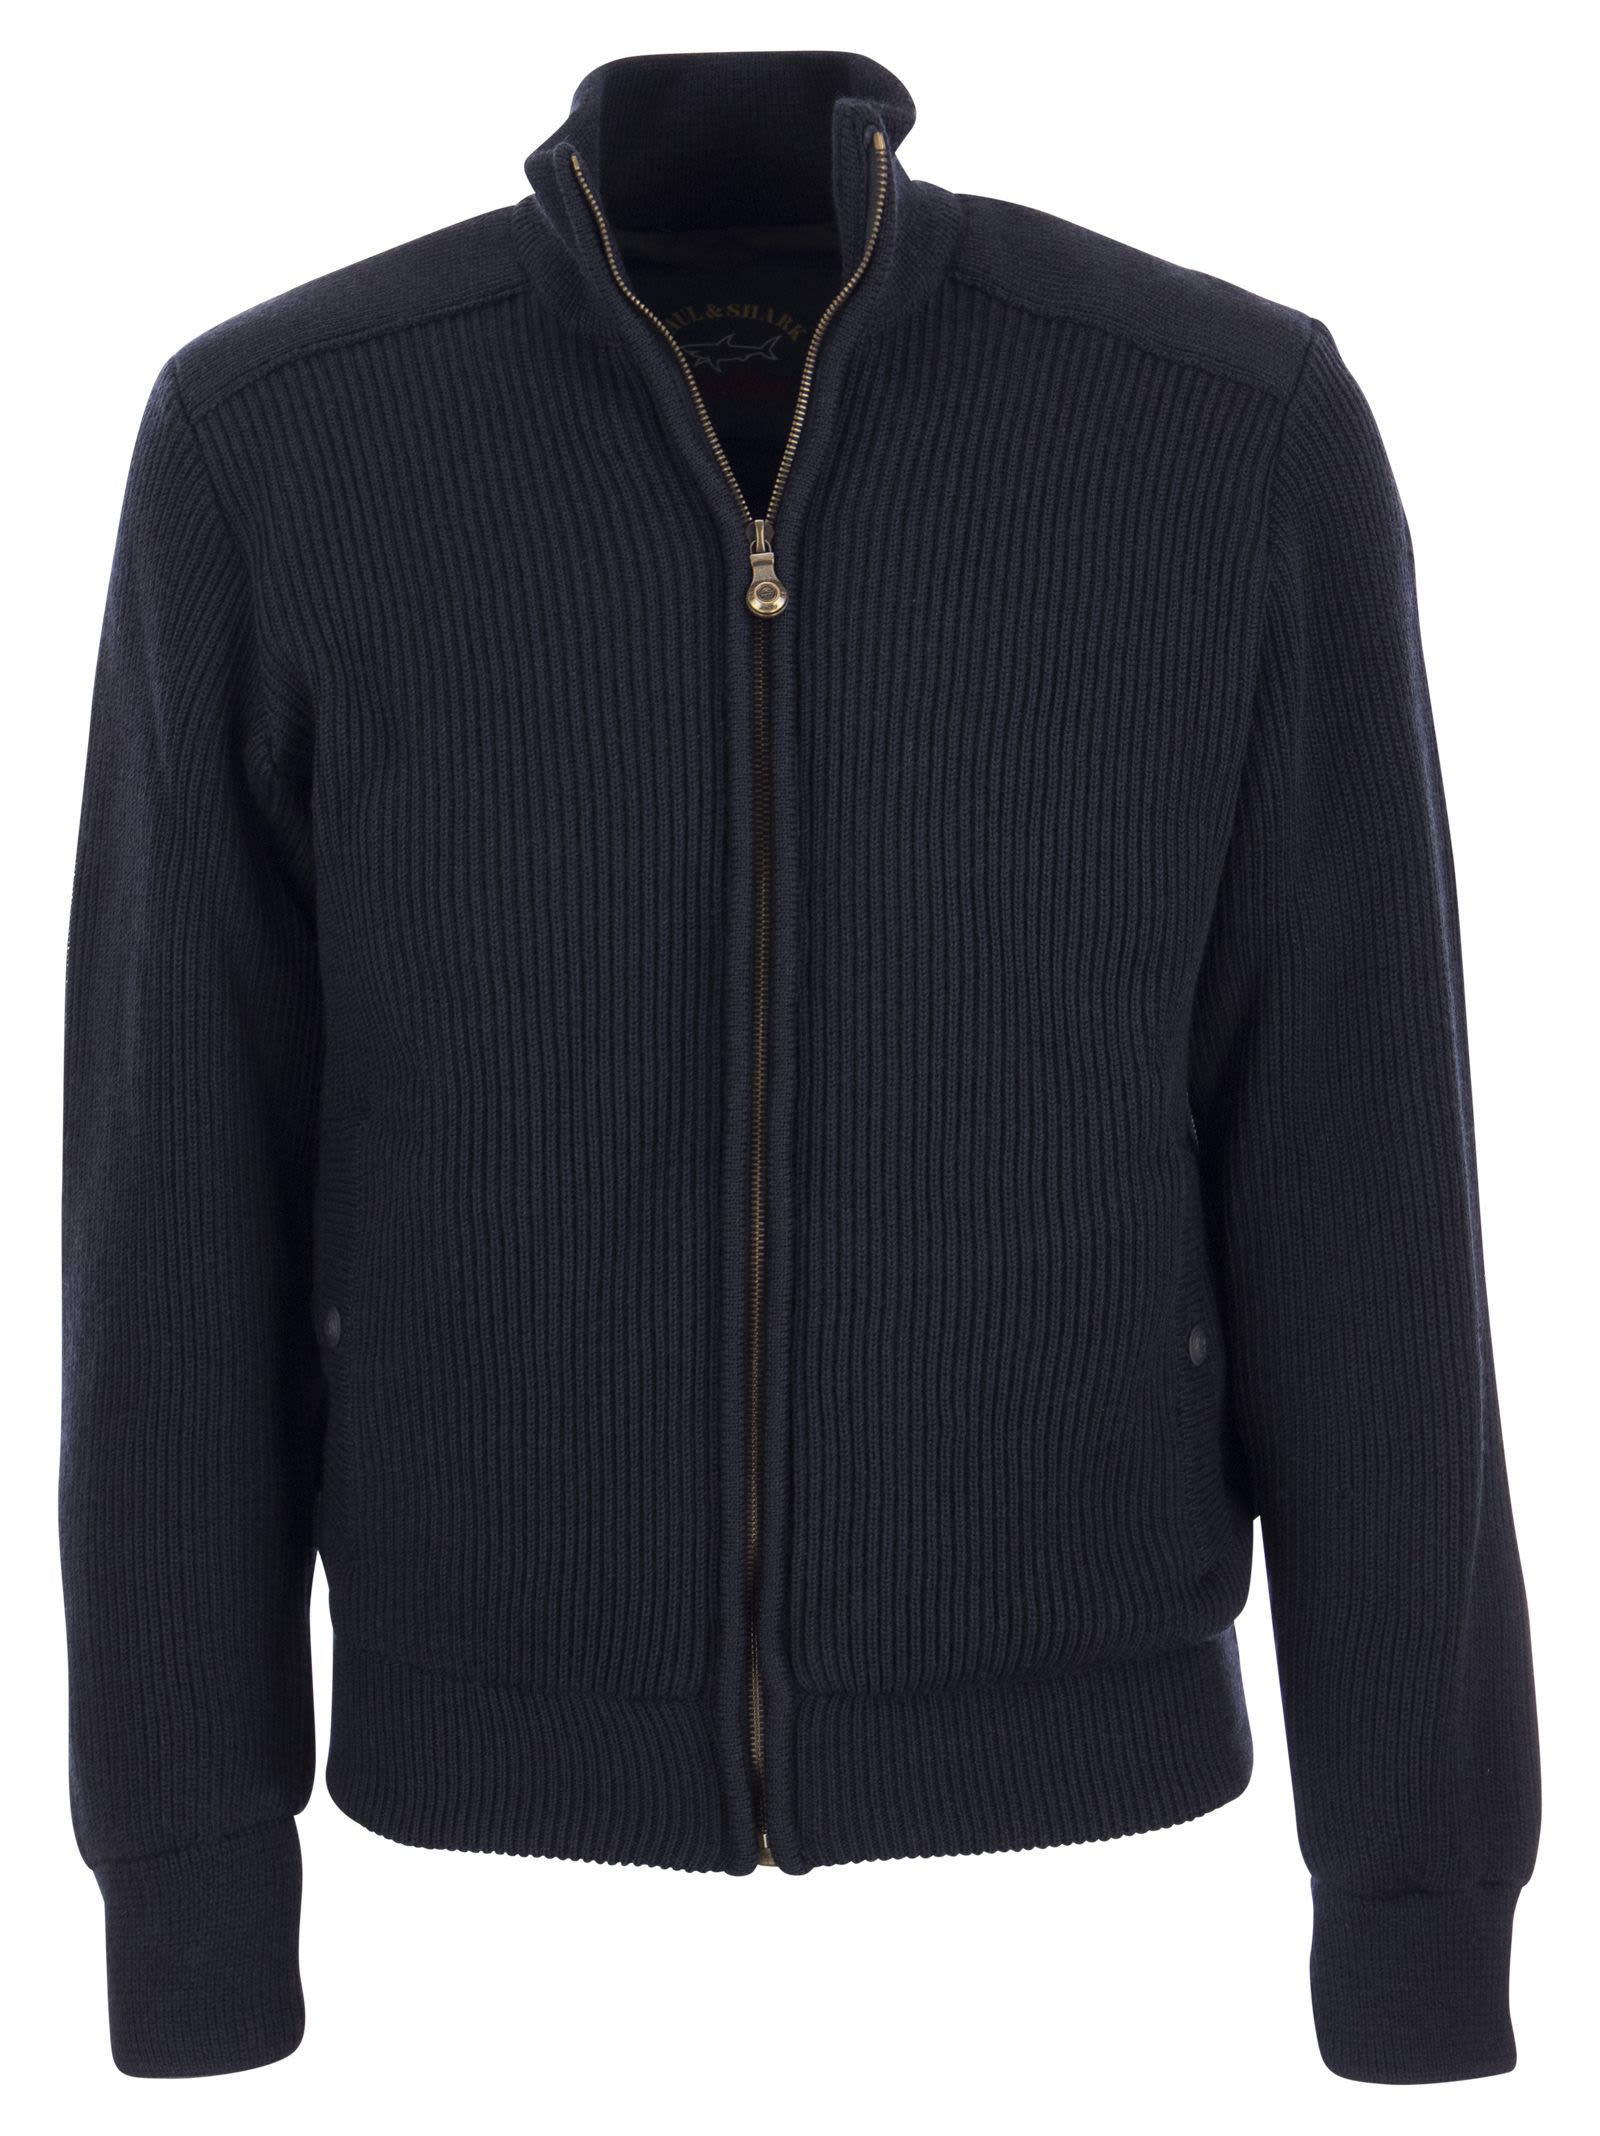 Paul&amp;shark Wool Cardigan With Zip And Iconic Badge In Navy